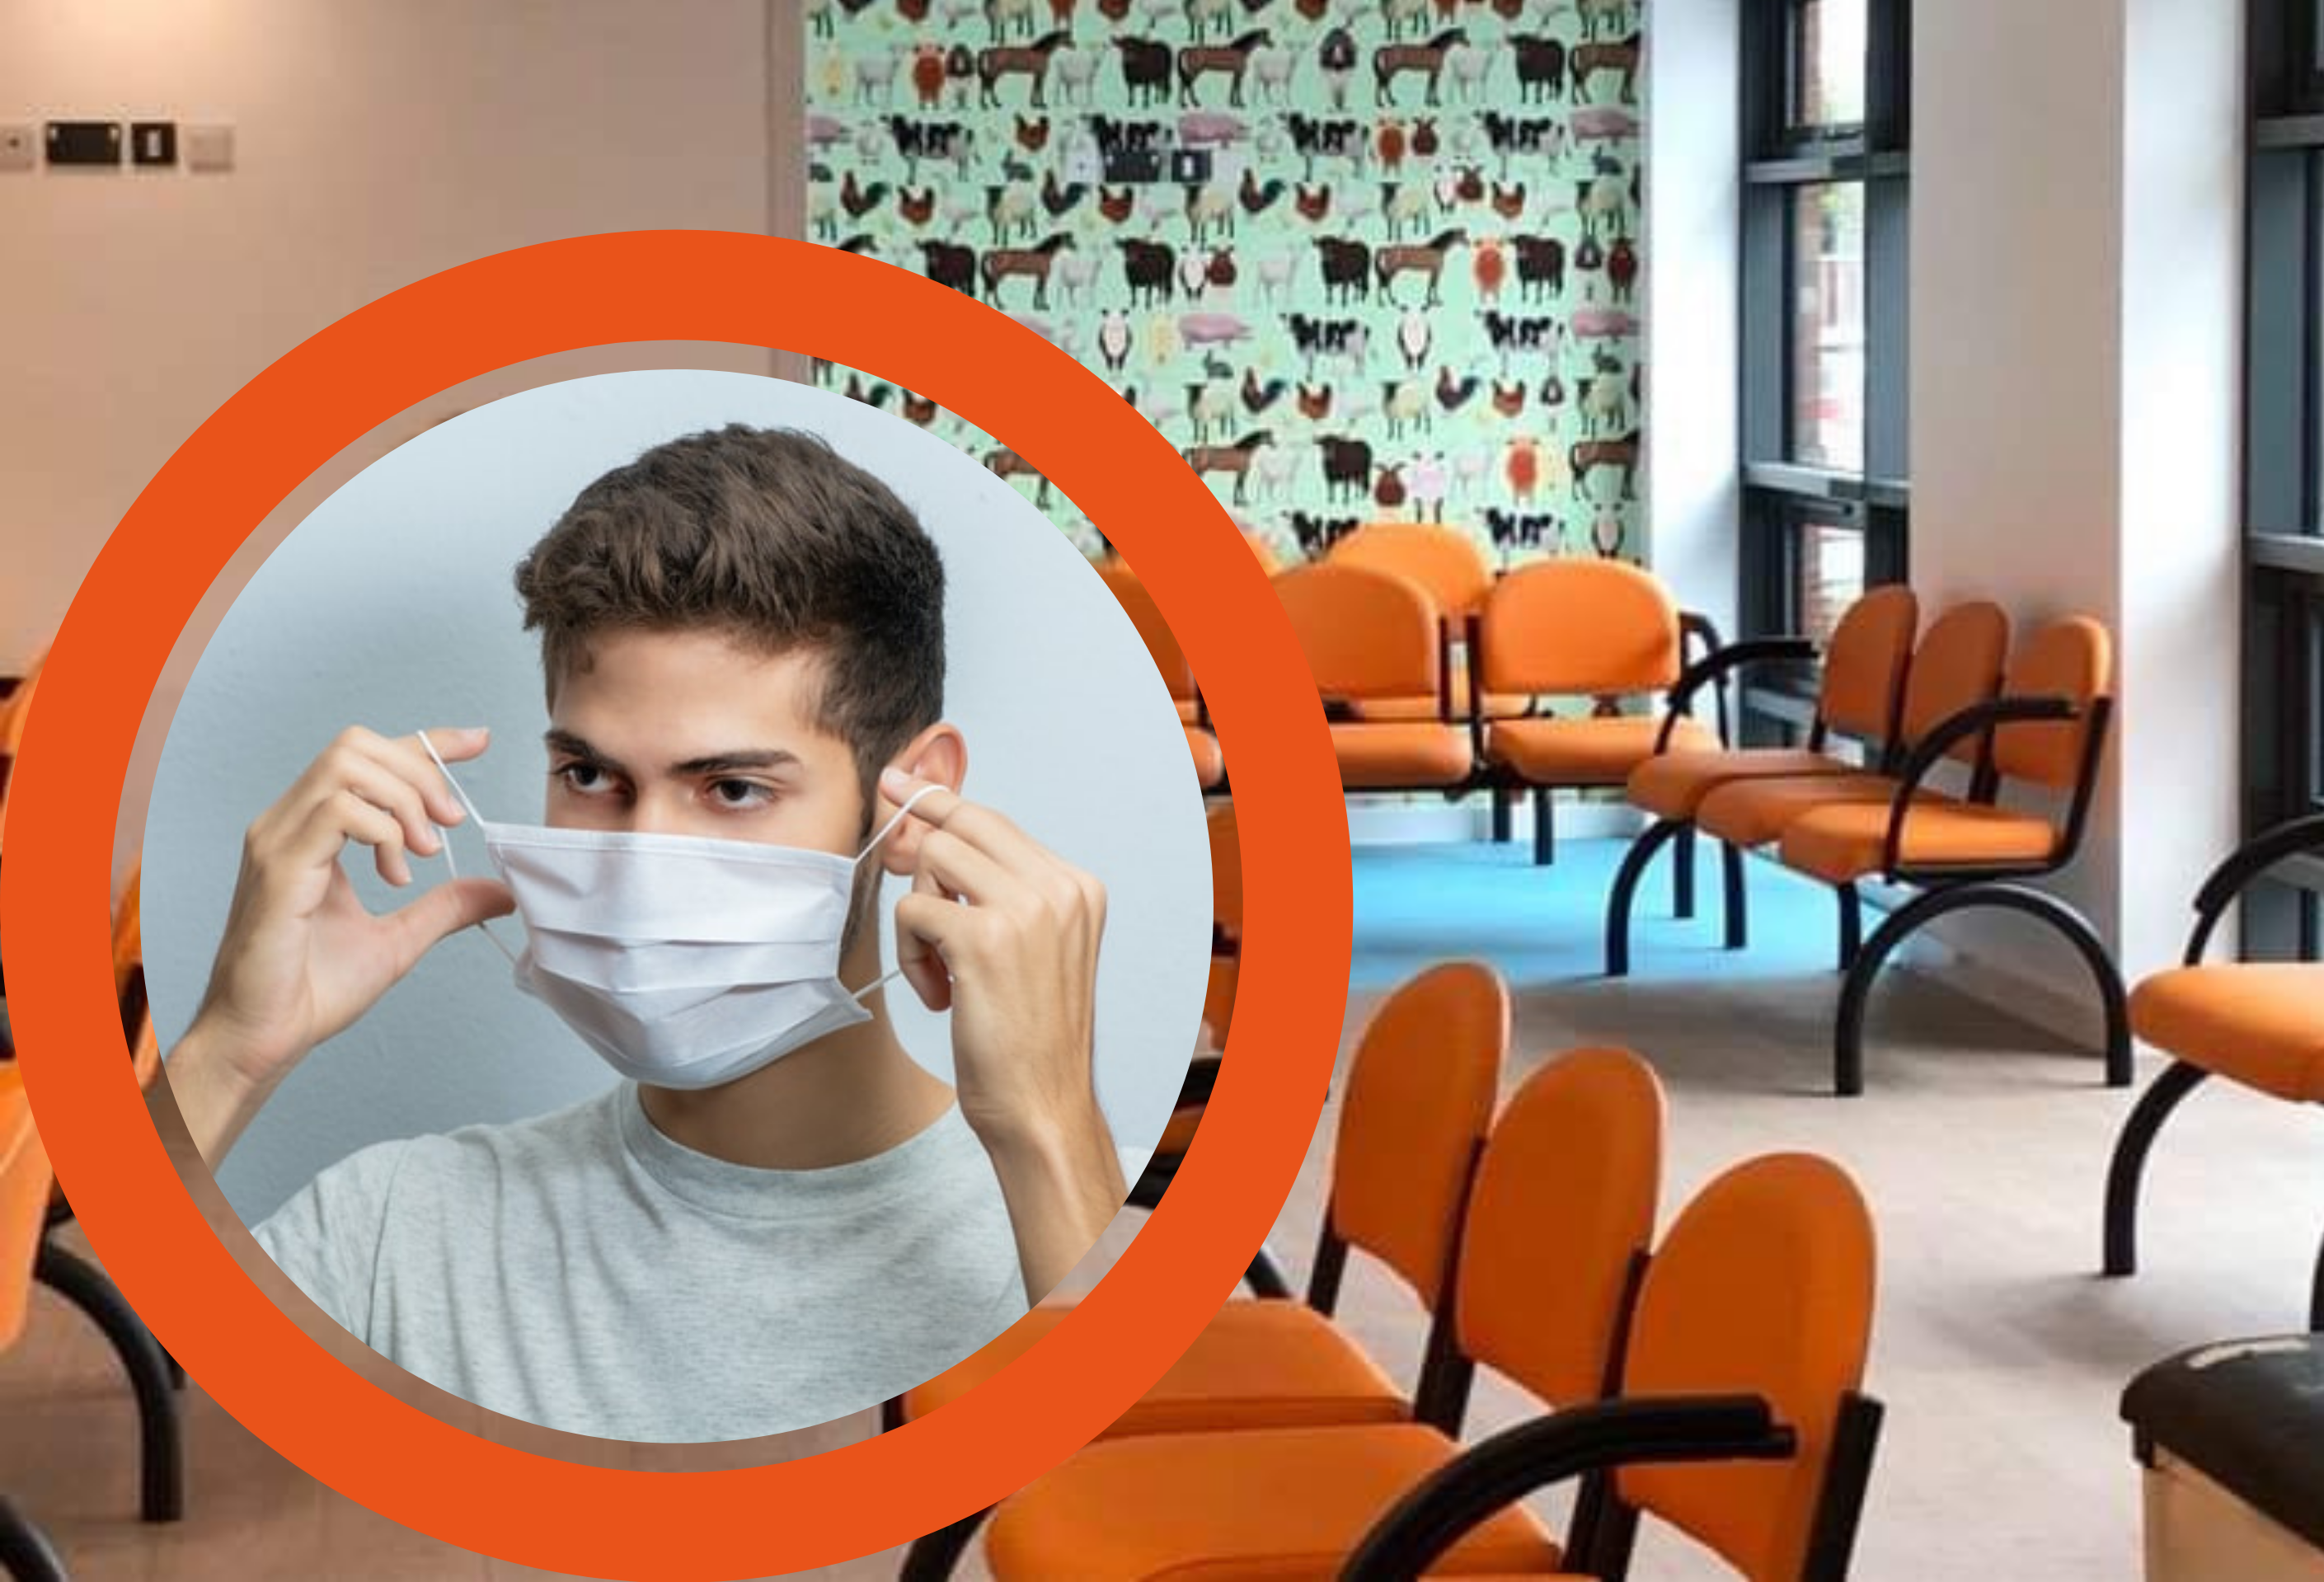 NEWS | Hereford Medical Group asks patients to continue to wear masks when visiting the surgery